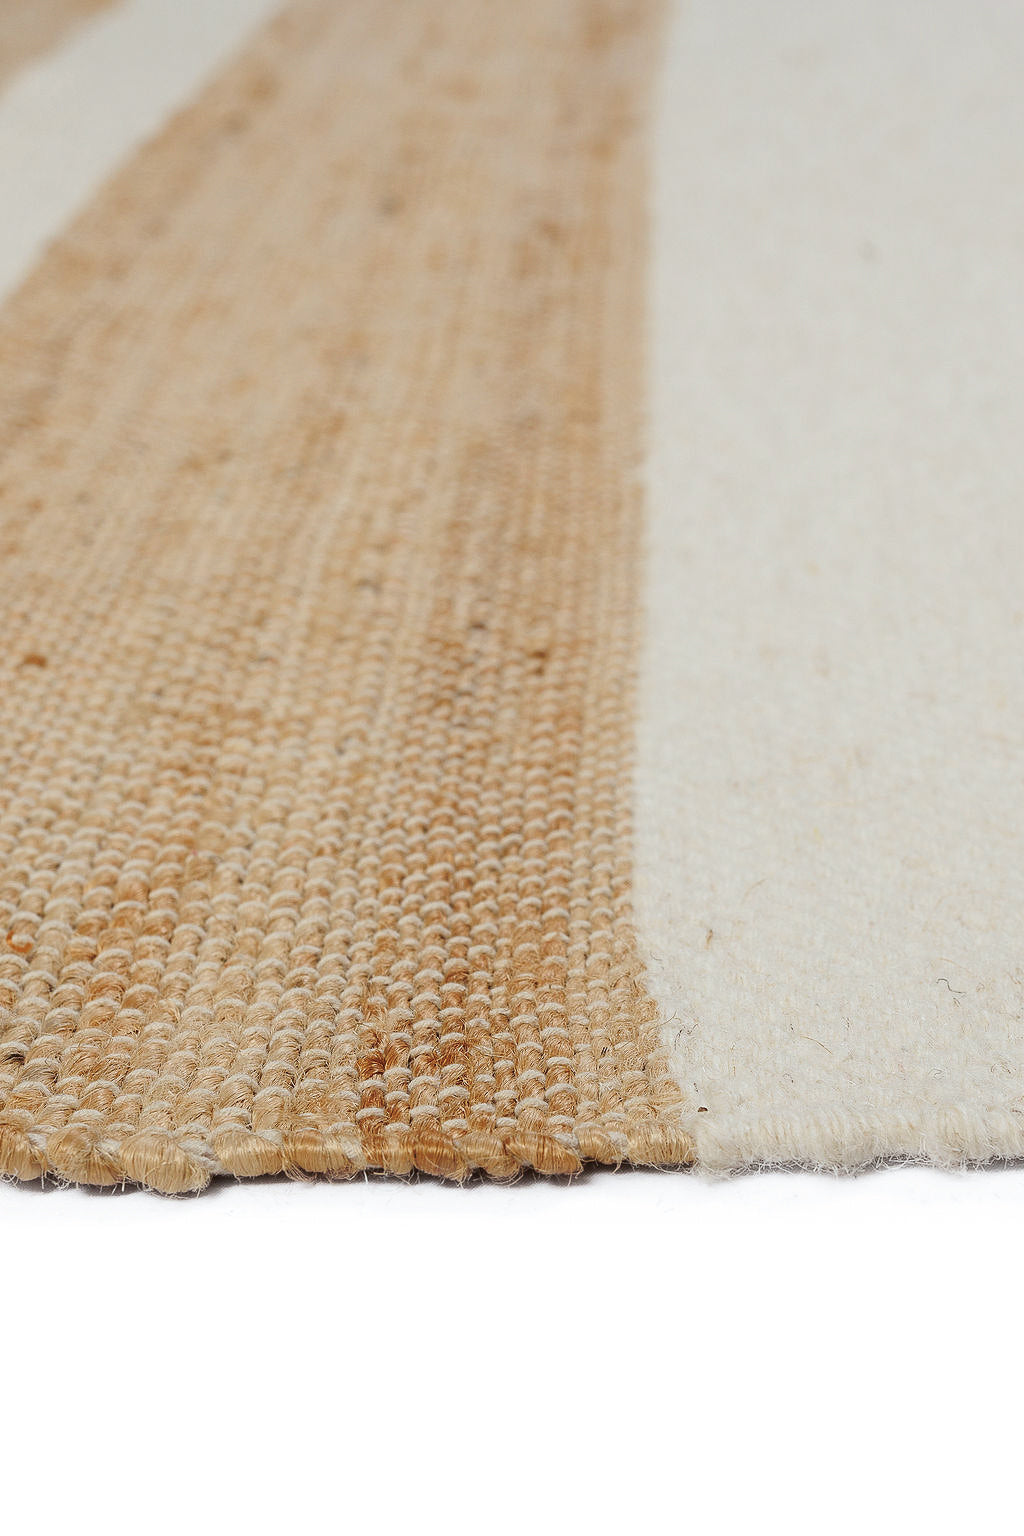 jute rug with white stripes